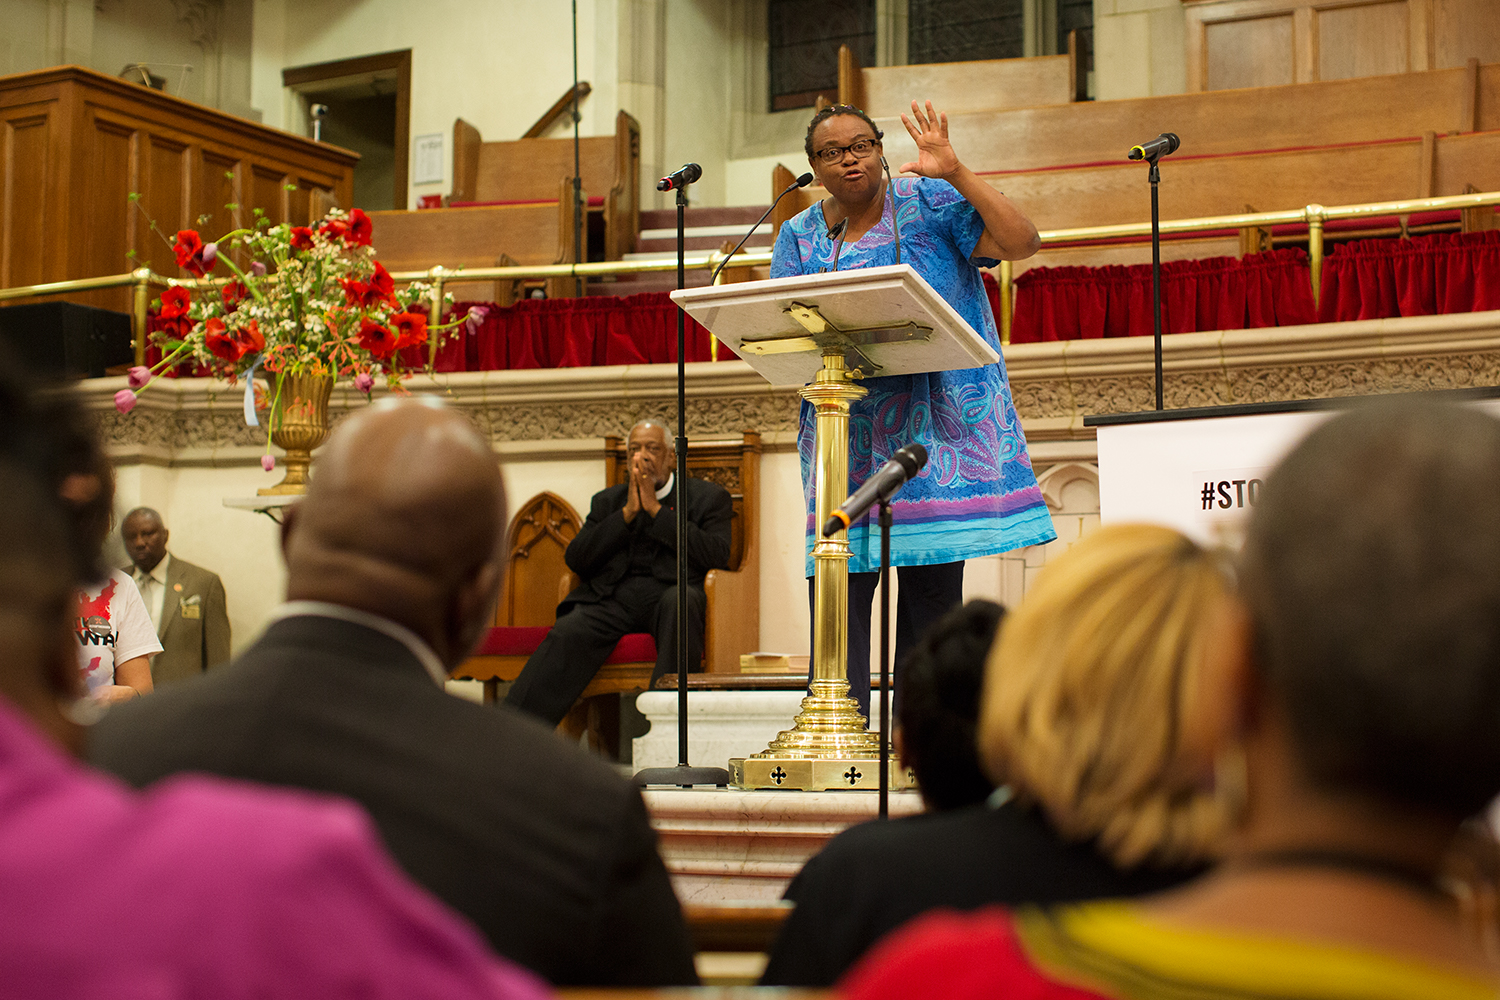  Interfaith service at Harlem’s historic  Abyssinian Baptist Church  organized by advocacy group  VOCAL-NY  to call for end to the war on drugs on the eve of the United Nations General Assembly Special Session on the world drug problem ( UNGASS ), NY